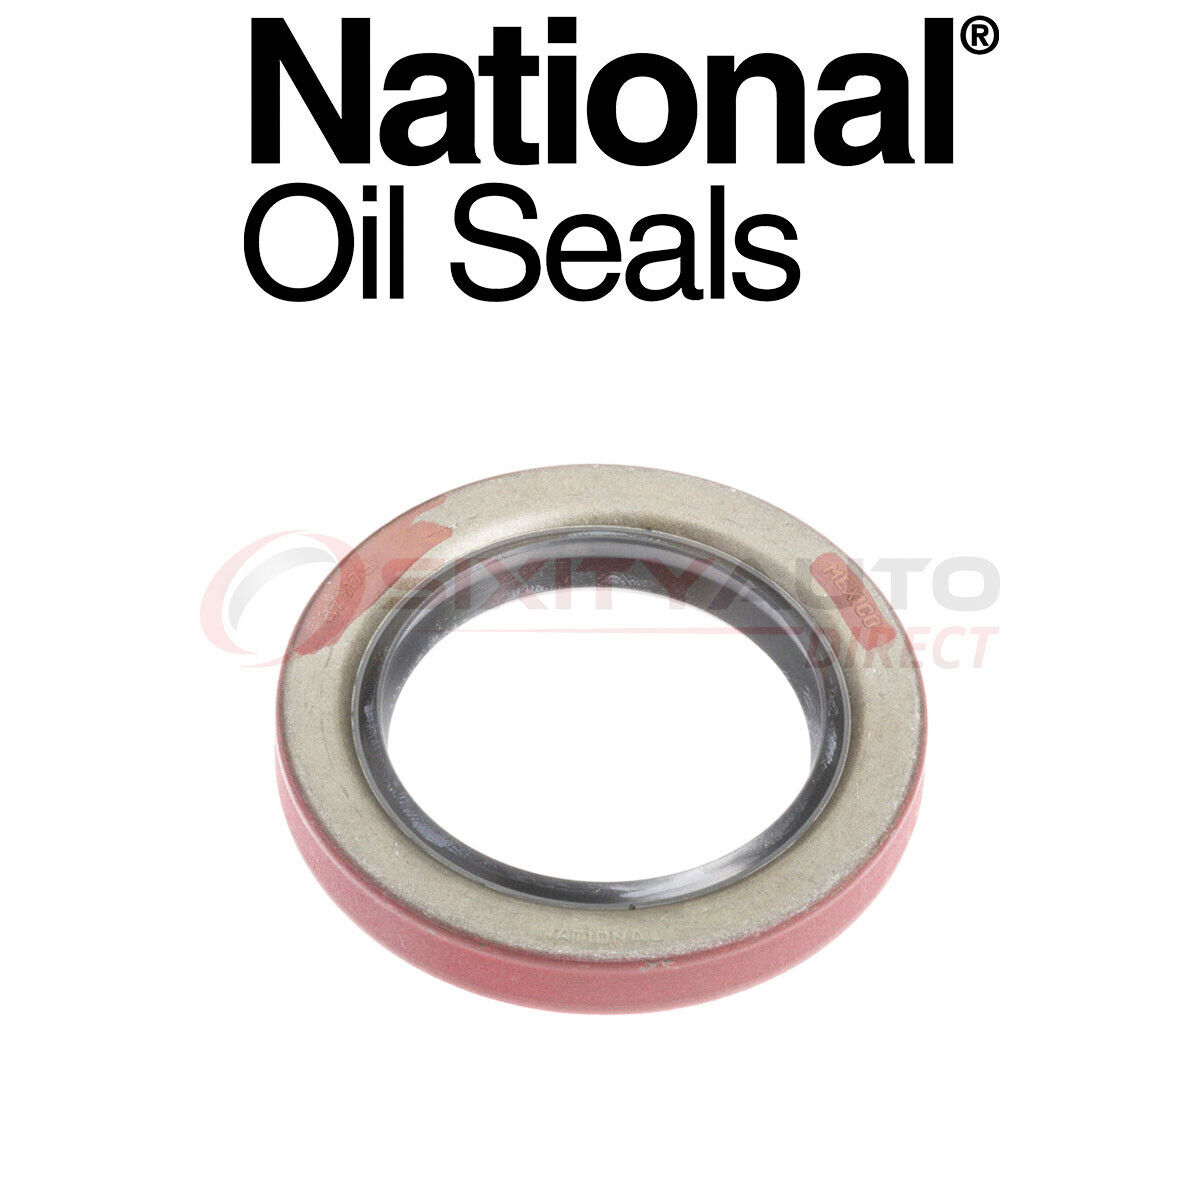 National Wheel Seal for 1975-1982 Chevrolet LUV 1.8L 2.2L L4 - Axle Hub Tire zi